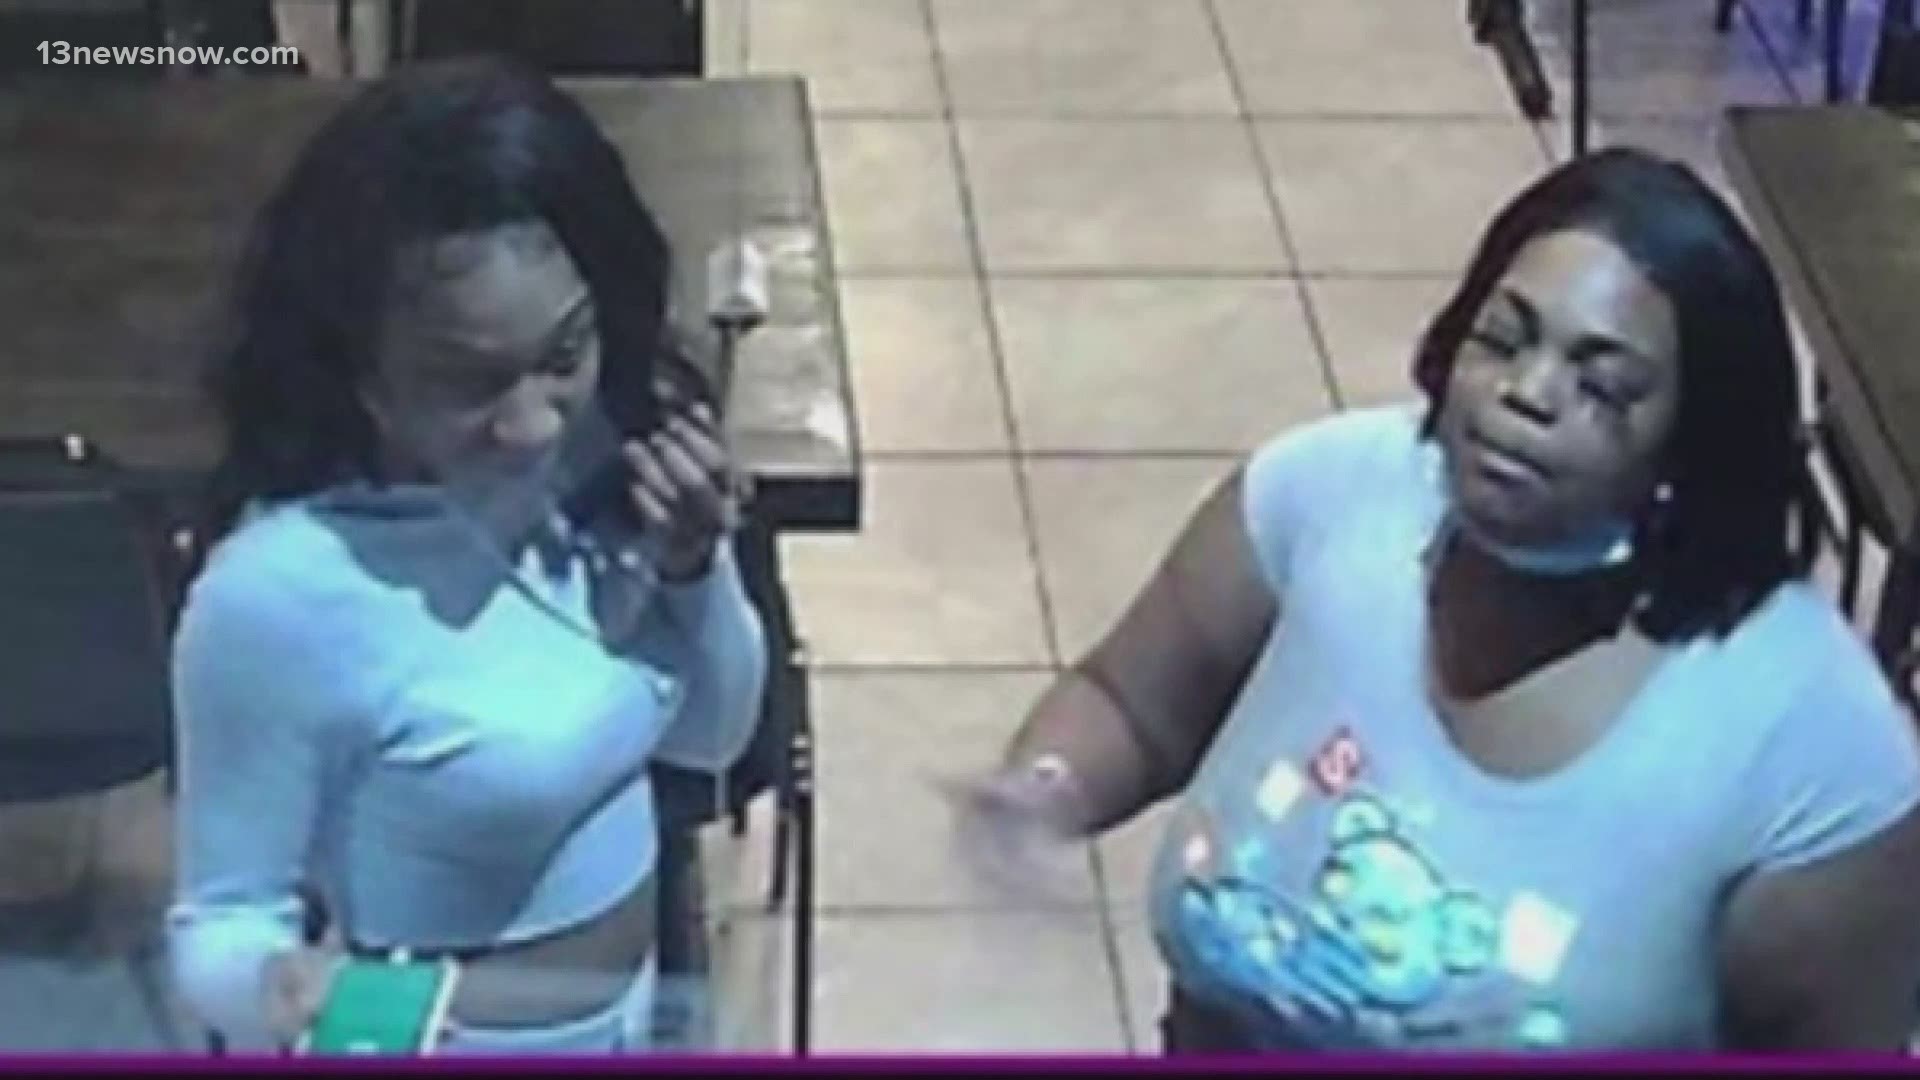 A search is underway for two women accused of assaulting a karaoke bar employee in Virginia Beach and left the bar without paying. 13News Now Ali Weatherton has more